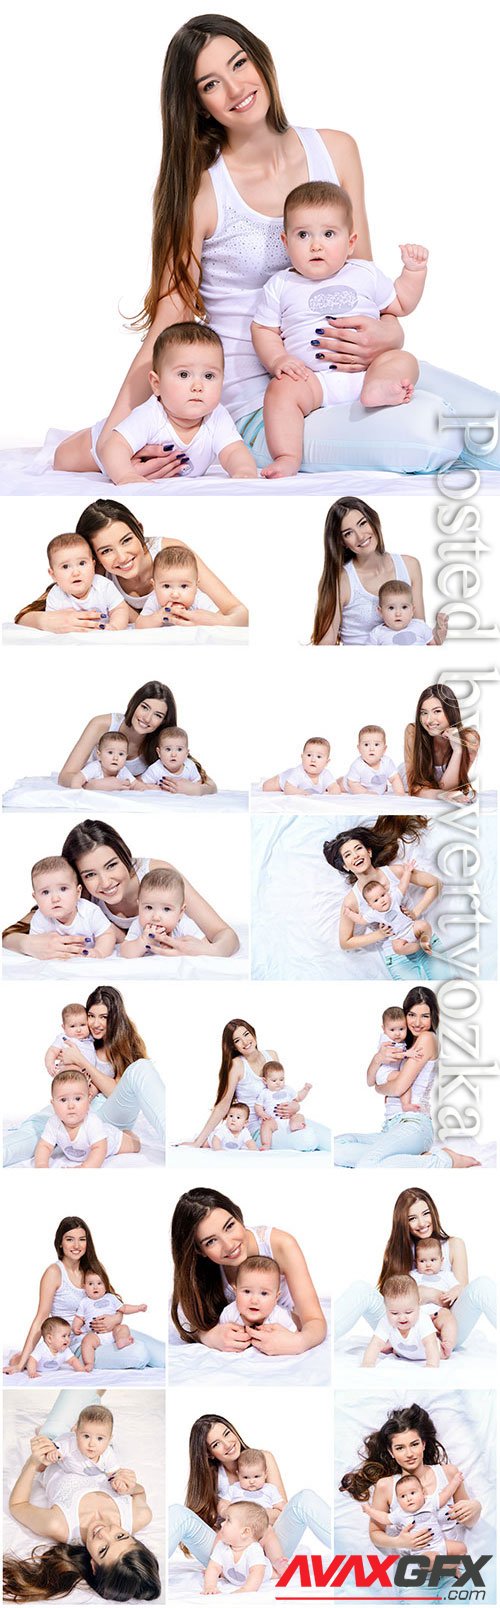 Young mother with children stock photo